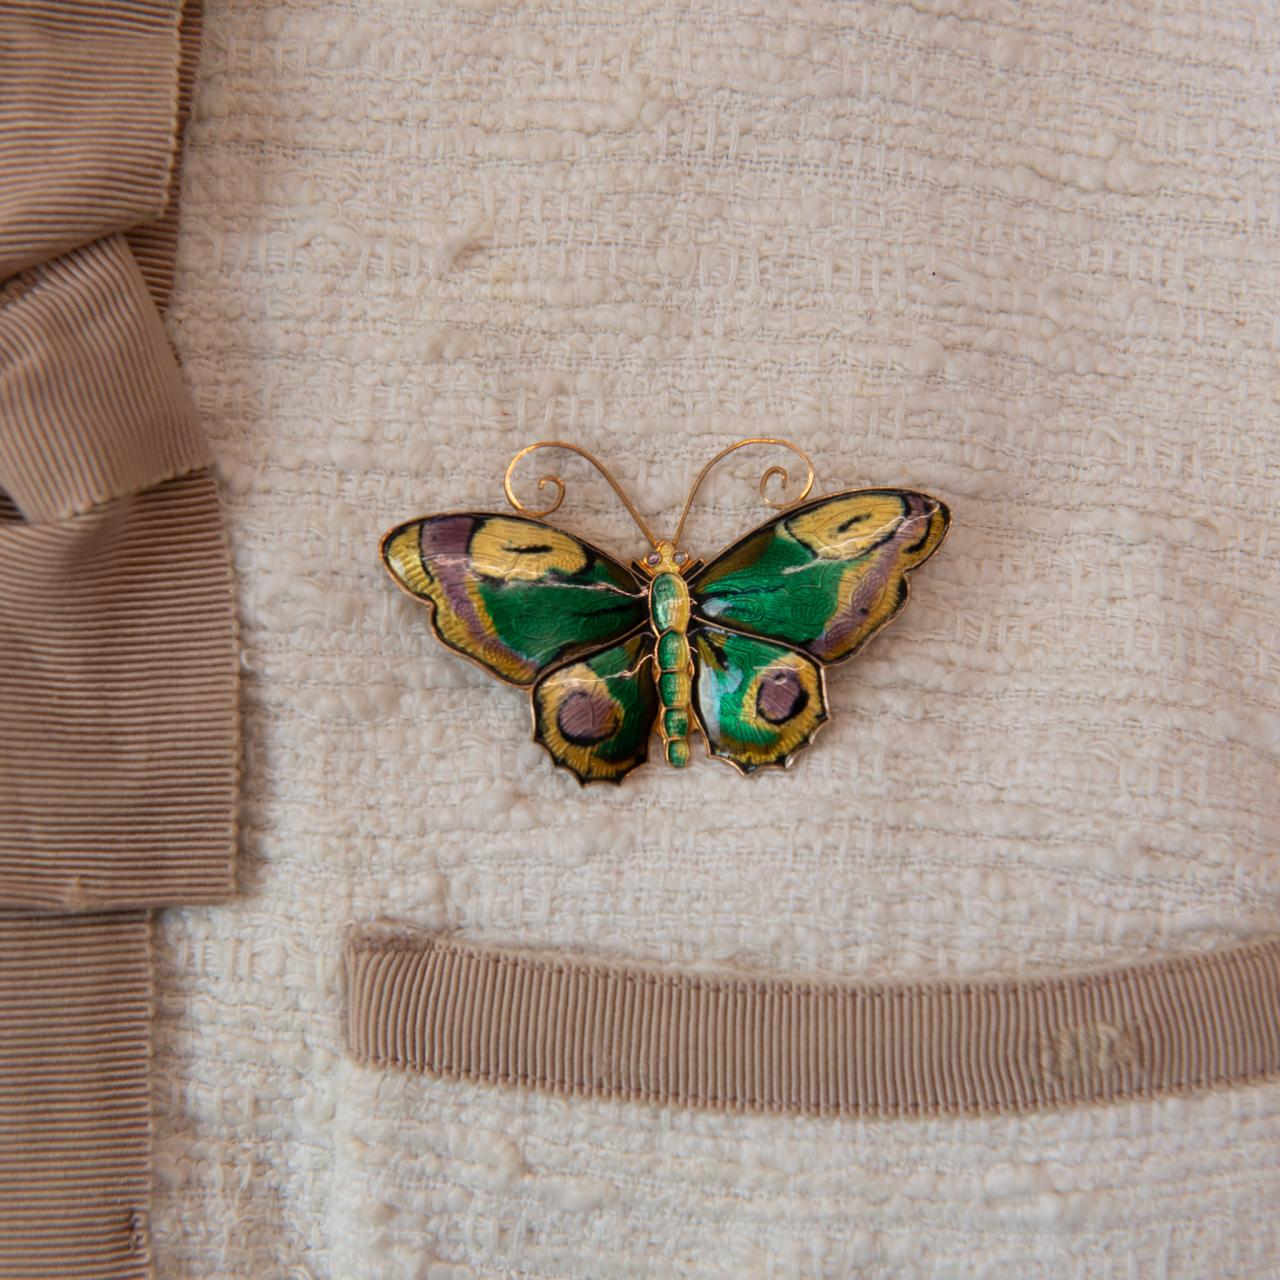 Vintage Emerald Green, Gold and Lavender Vermeil Butterfly Brooch